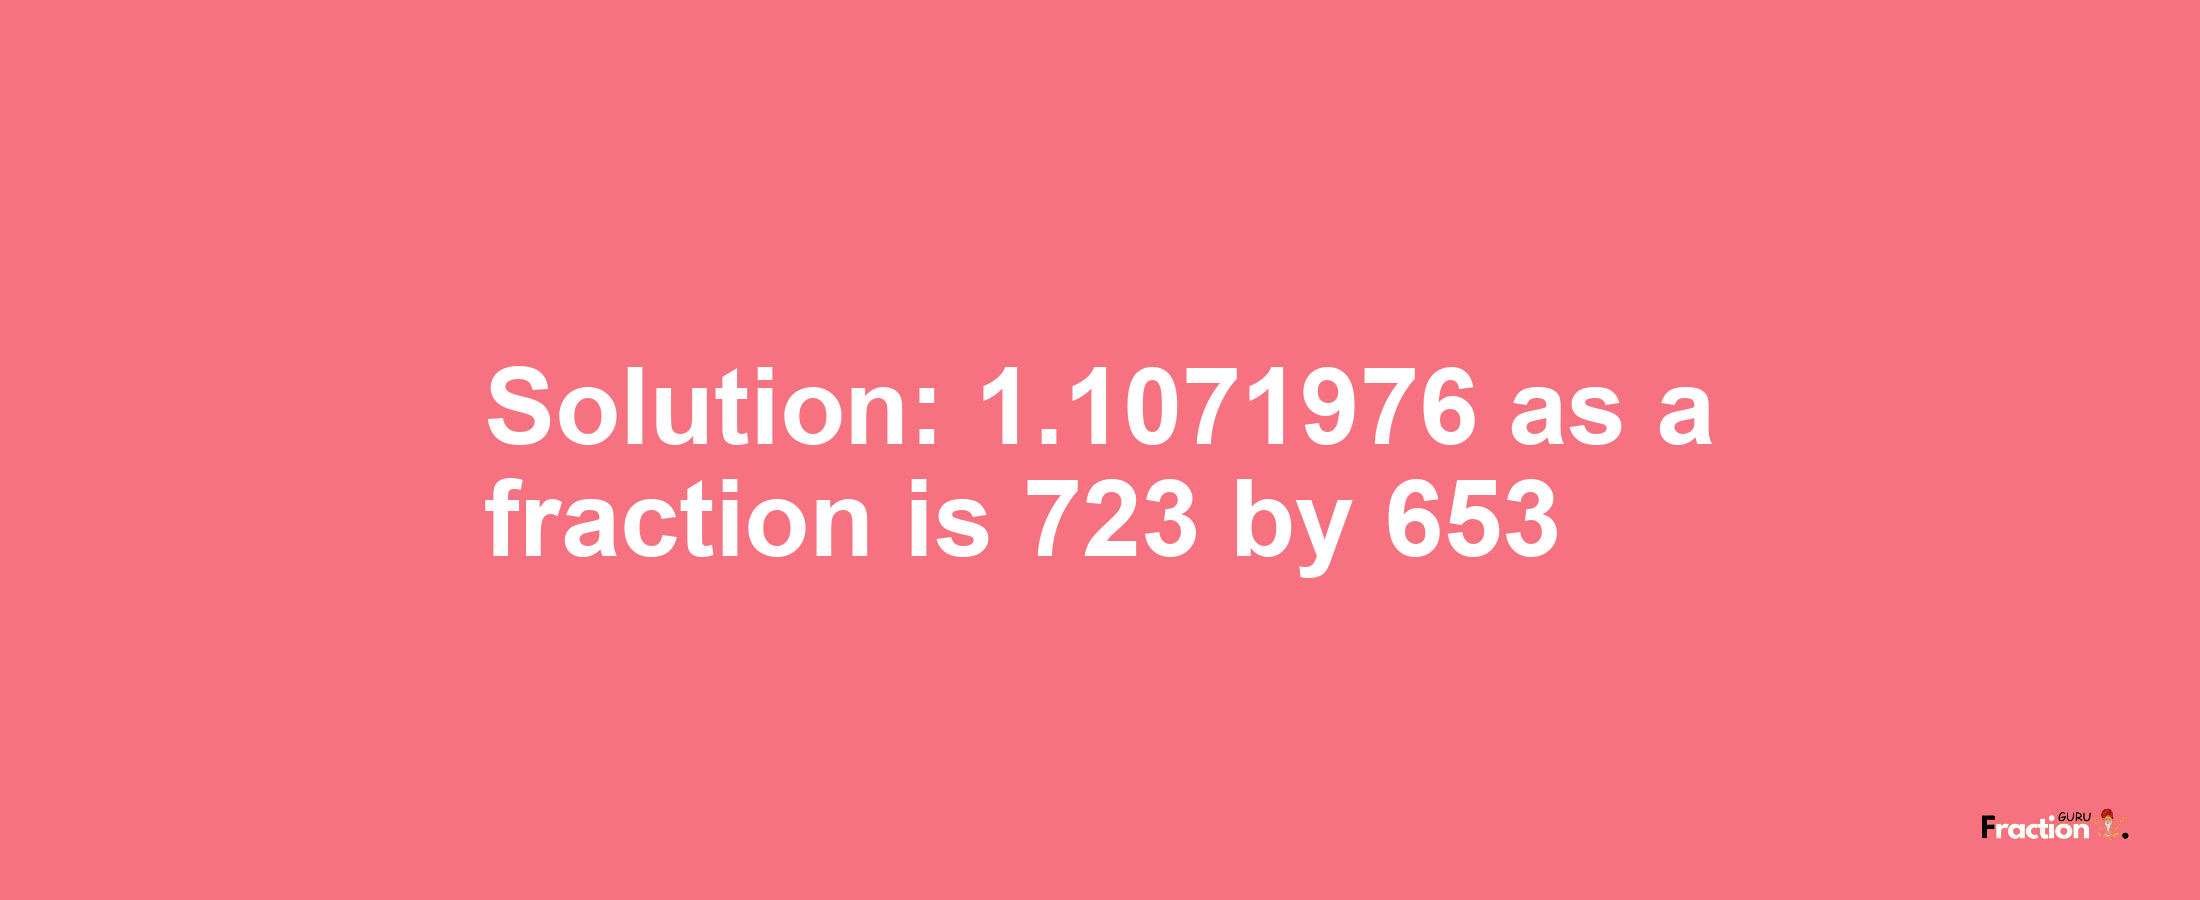 Solution:1.1071976 as a fraction is 723/653